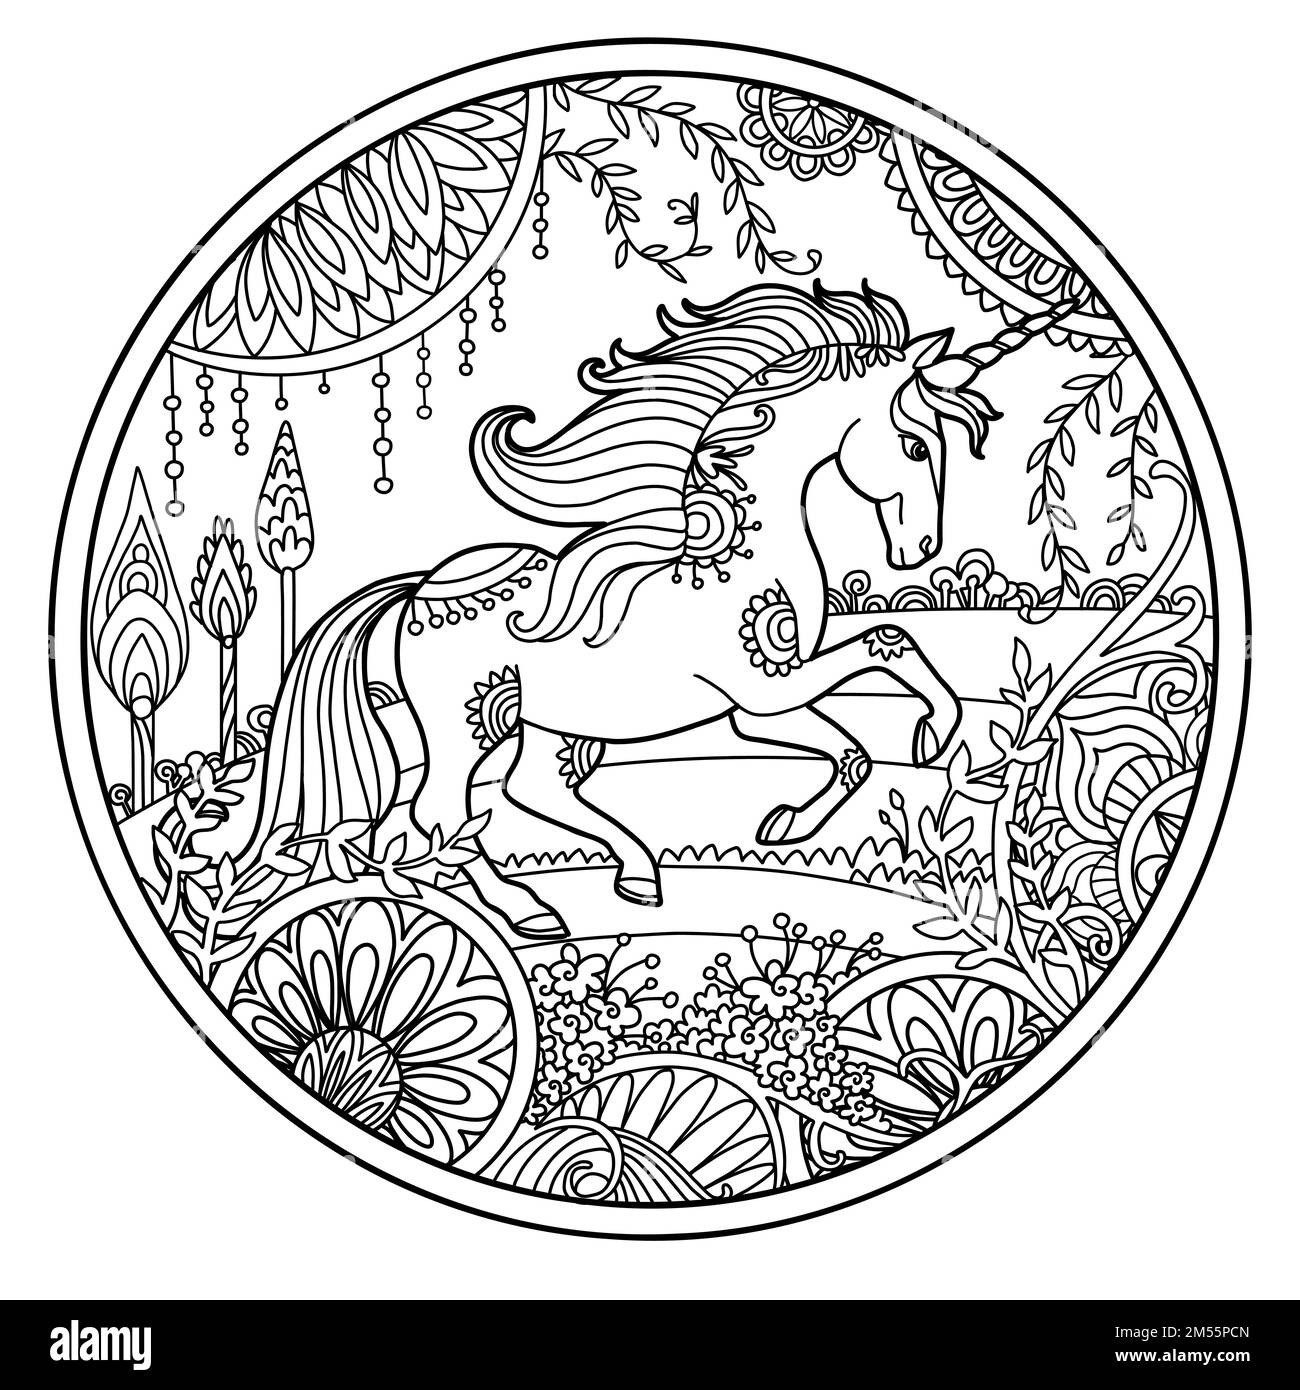 Galloping unicorn in flower frame round shape. Hand drawing magic horse for coloring book, tattoo, design, puzzle, print, decor. Stylized vector illus Stock Vector